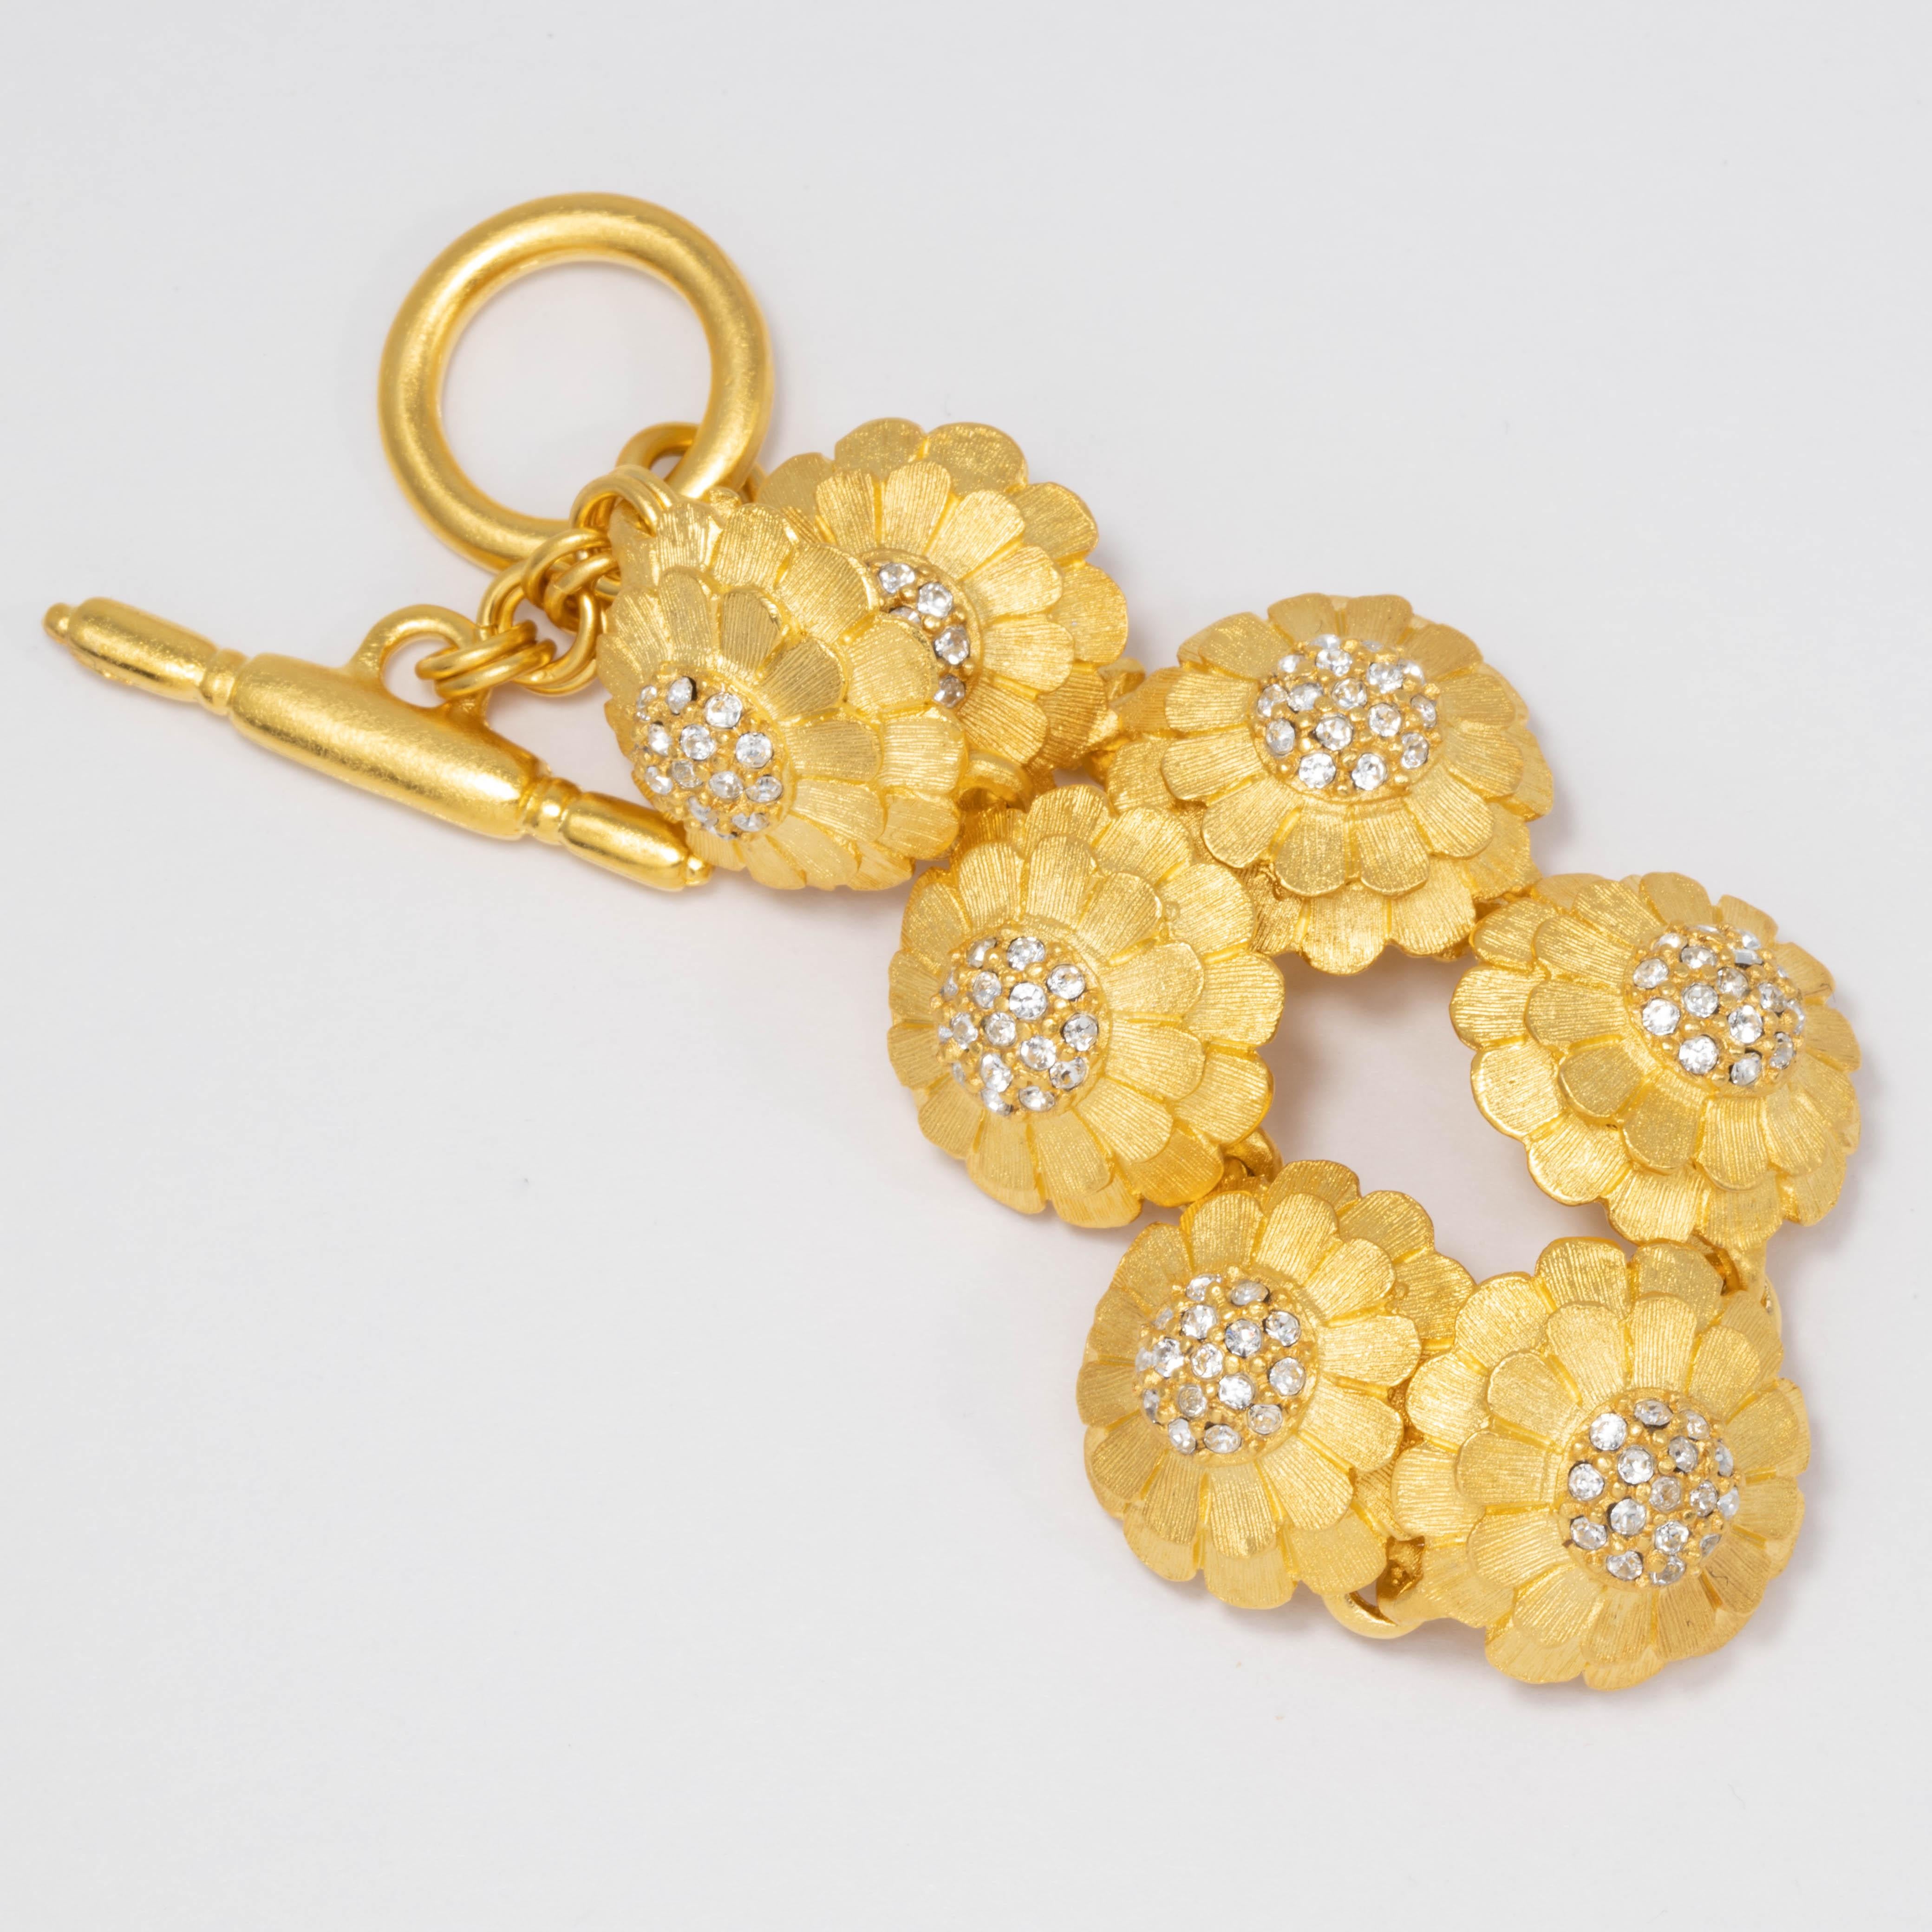 A glowing gold feminine touch! Blooming flowers in glowing satin gold and sparkling crystals, linked together to elevate your look.

Bracelet by Kenneth Jay Lane. Toggle clasp. Gold plated.

Tags, Marks, Hallmarks: KJL